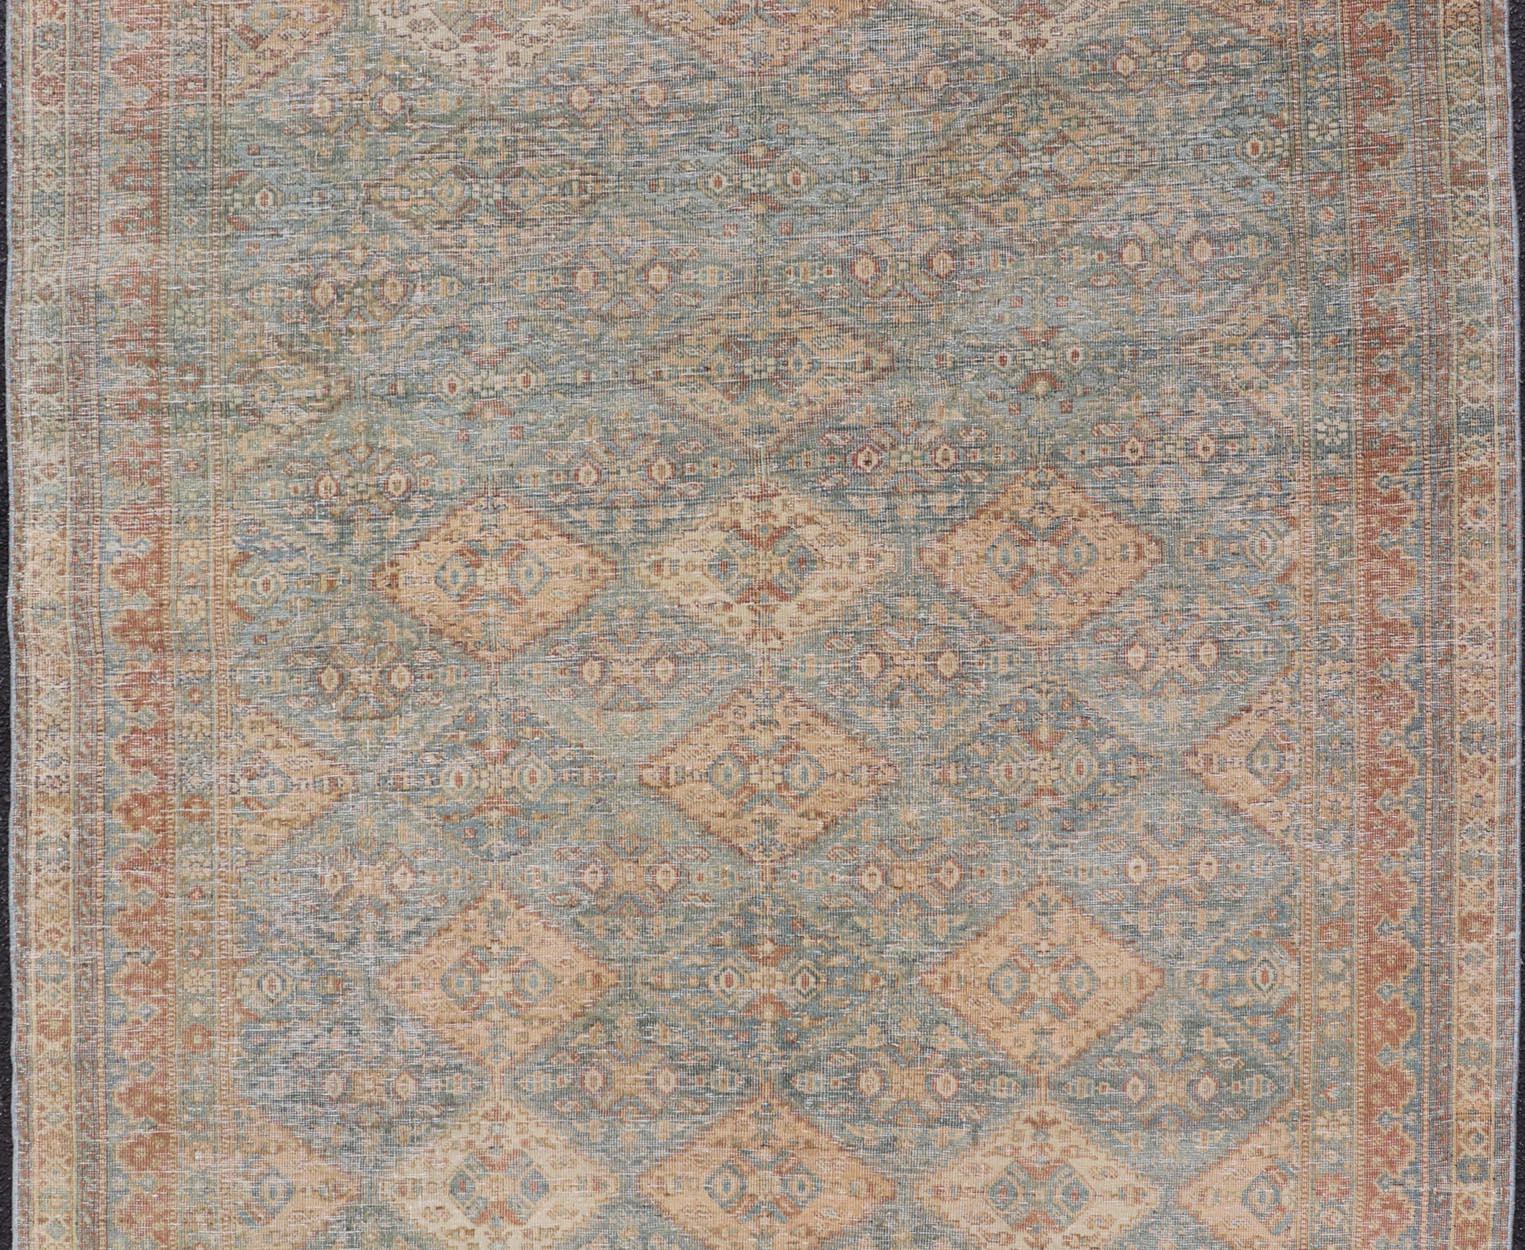 20th Century Antique Persian Tabriz Rug in Wool with Diamond Design in Blue, Apricot & Gray For Sale